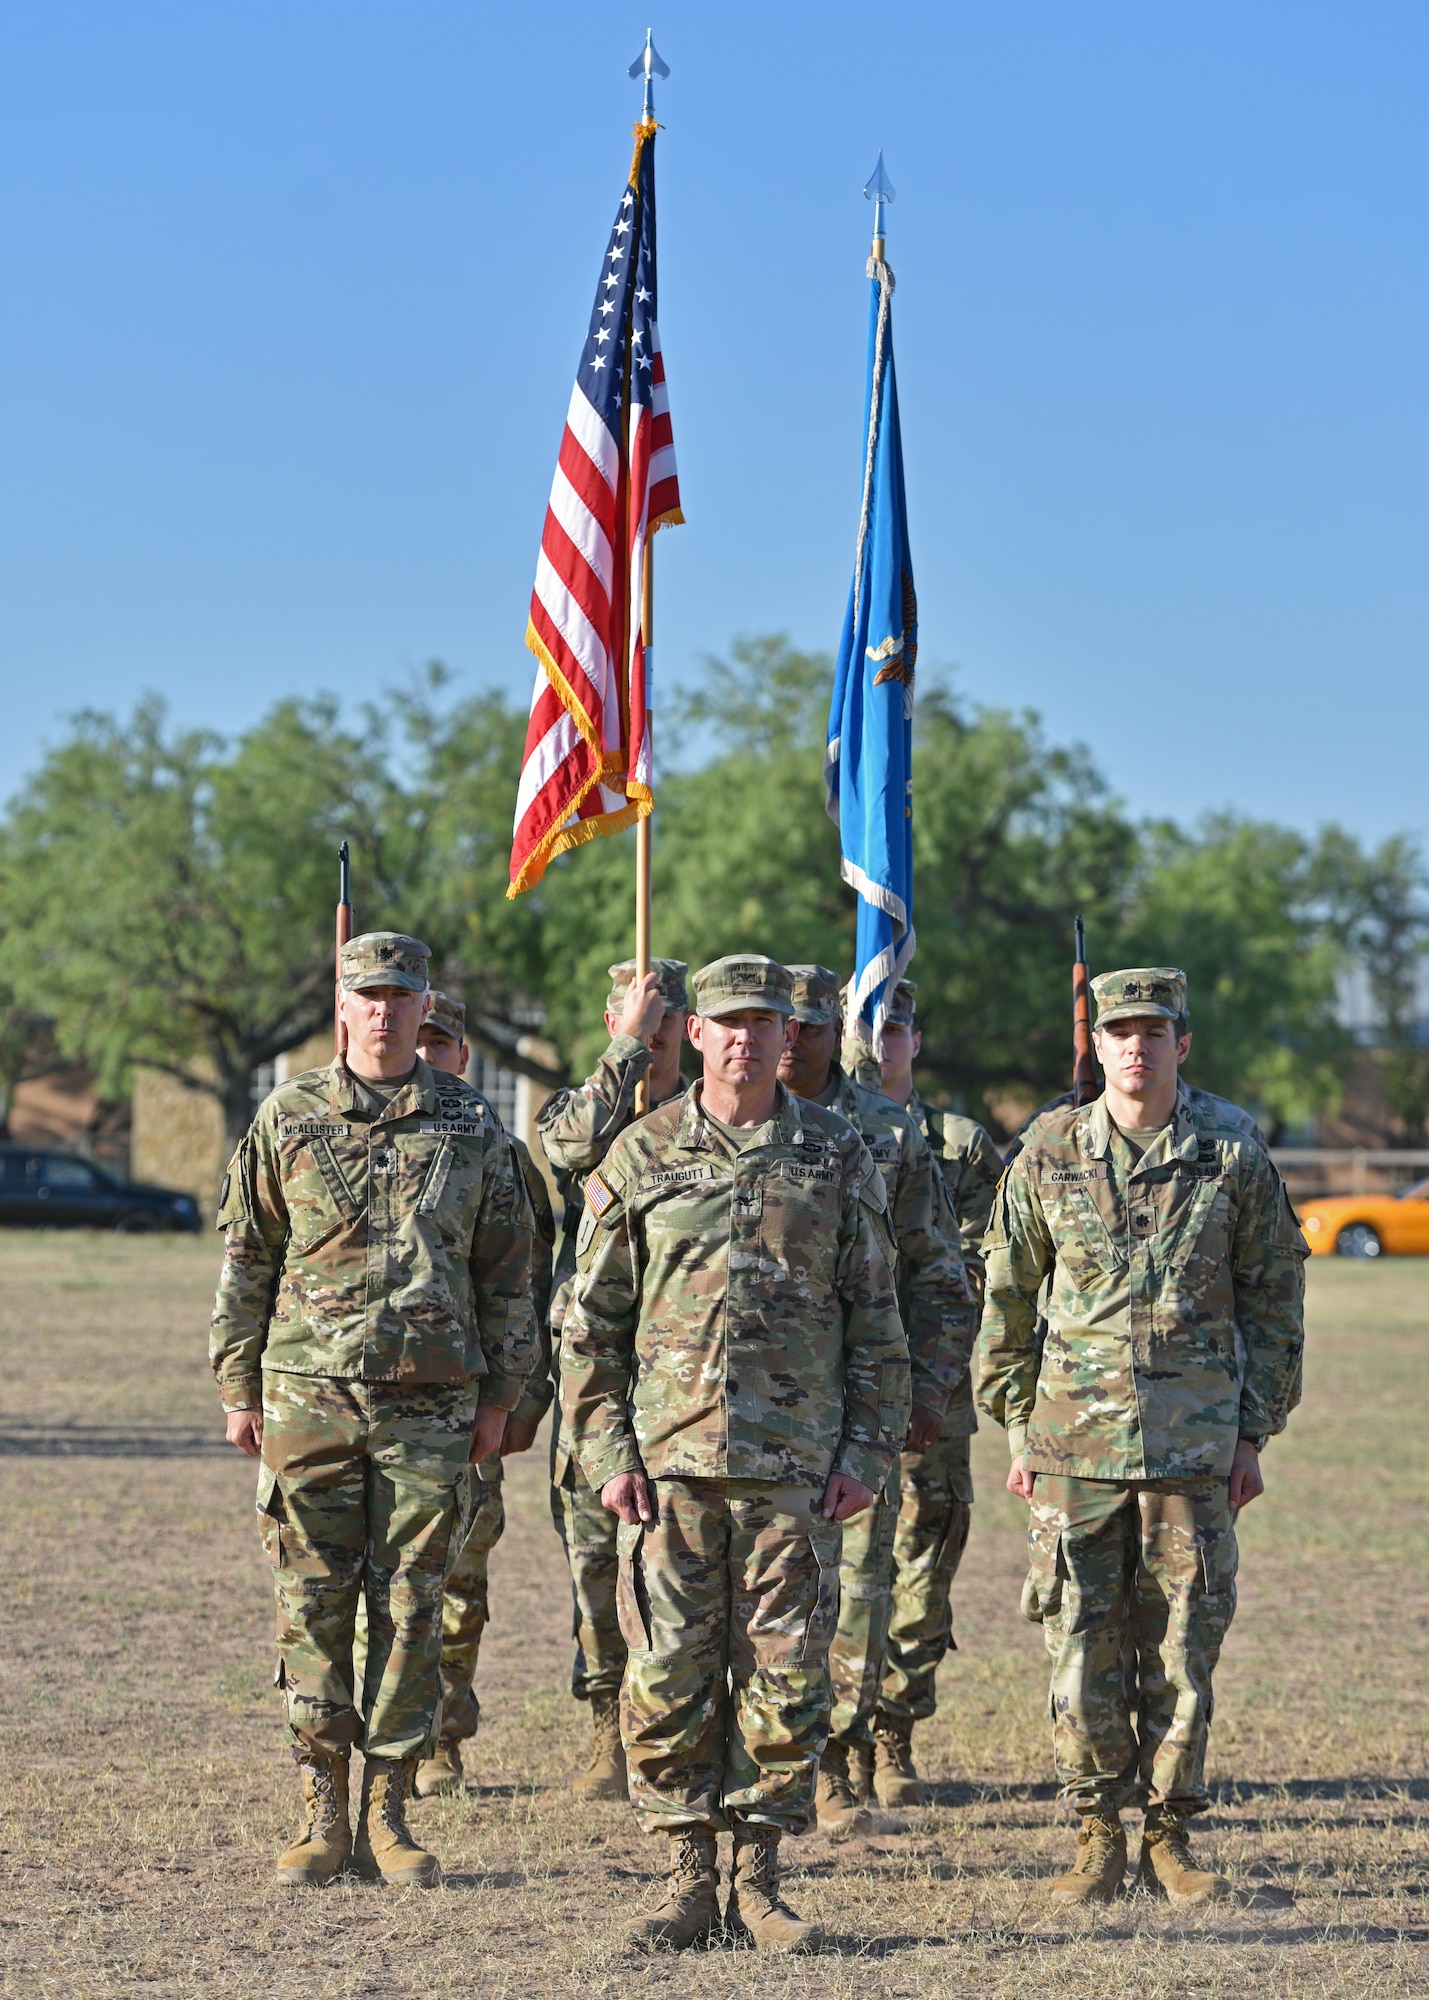 U.S. Army Lt. Col. Joseph Garwacki, outgoing 344th Military Intelligence Battalion commander, Col. Loren Traugutt, 111th Military Intelligence Brigade commander, and Lt. Col. John McAllister, incoming 344th MI BN commander, stand at attention during the 344th MI BN change of command ceremony at Fort Concho, San Angelo, Texas, June 21, 2022. Traugutt oversaw the transfer of command from Garwacki to McAllister. (U.S. Air Force photo by Senior Airman Ashley Thrash)